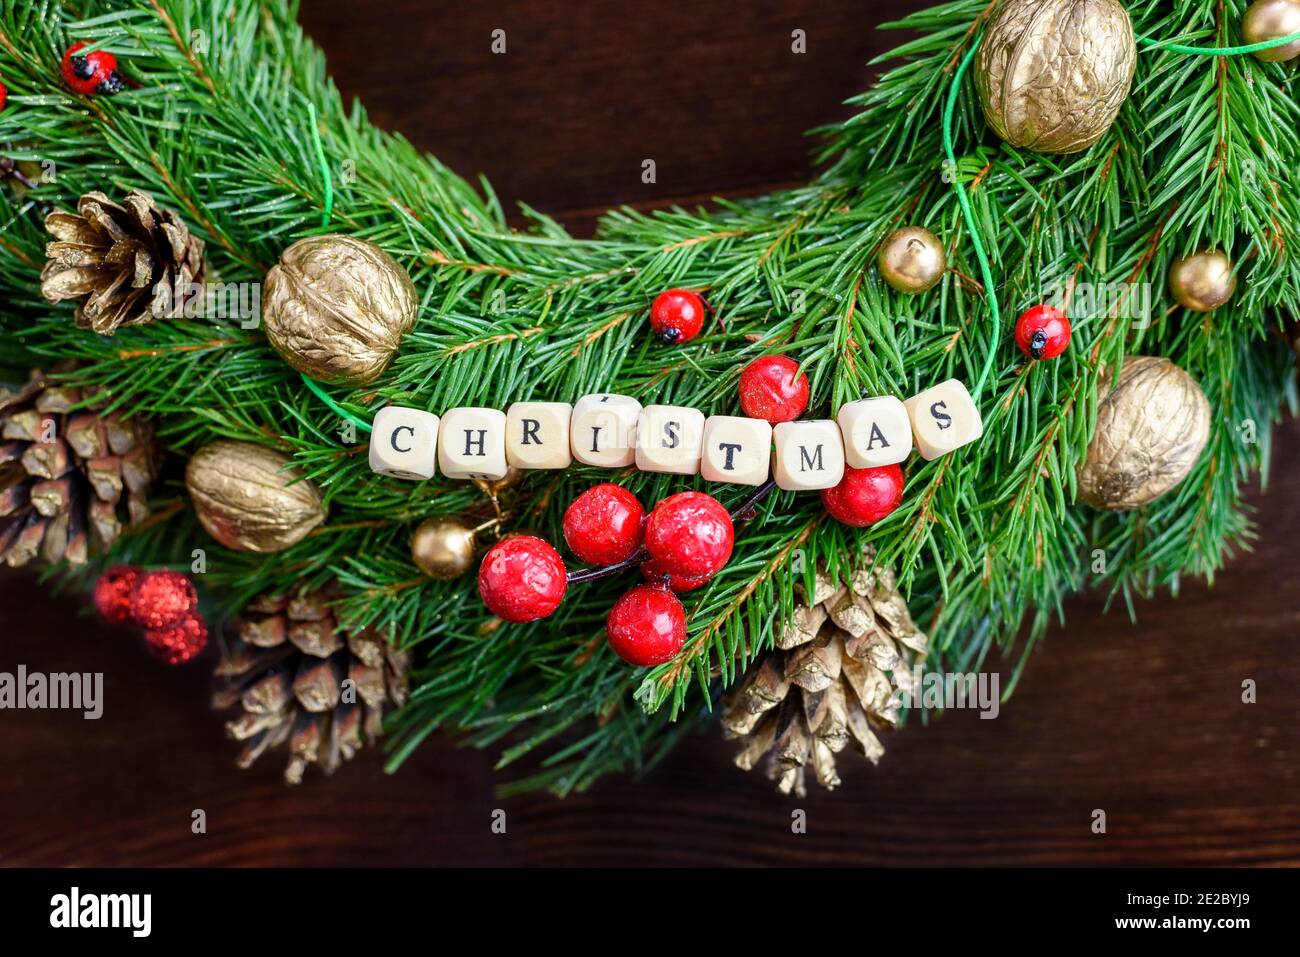 Beautiful Christmas wreath with 'Christmas' letters, top view, juicy colors Stock Photo